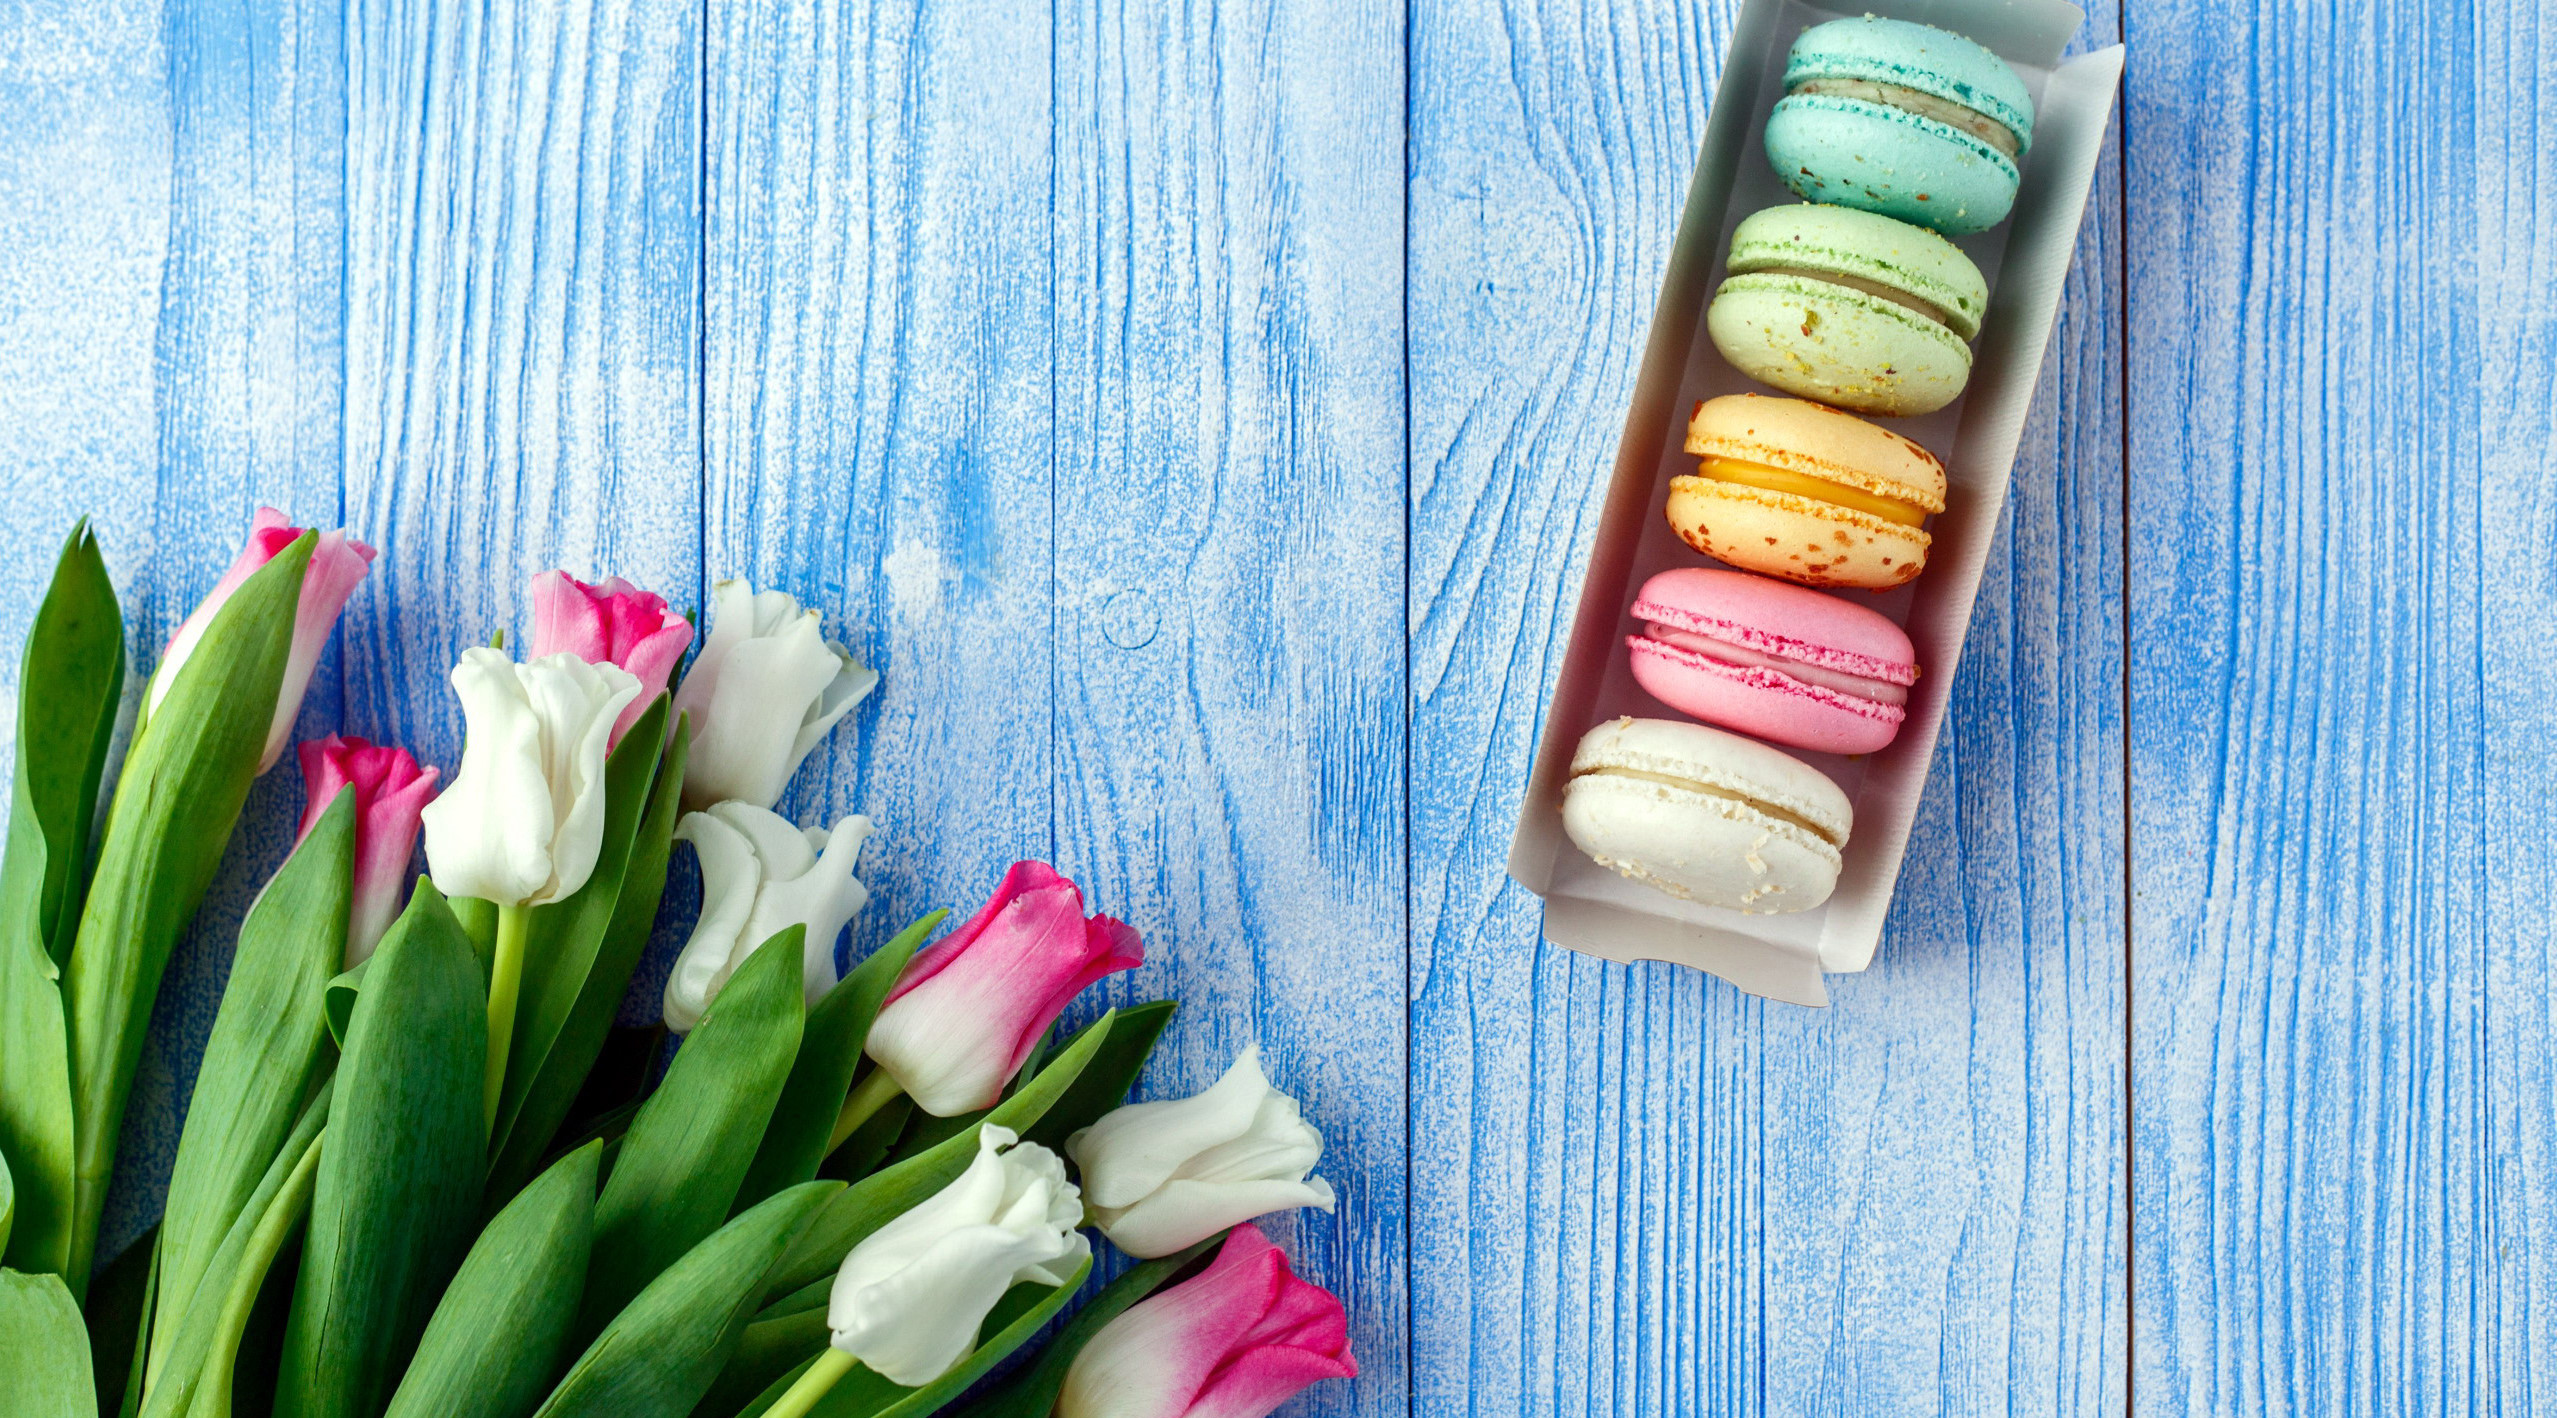 Colorful Flowers Sweets Food Tulips Cookies Macarons Wooden Surface Cyan 2557x1418